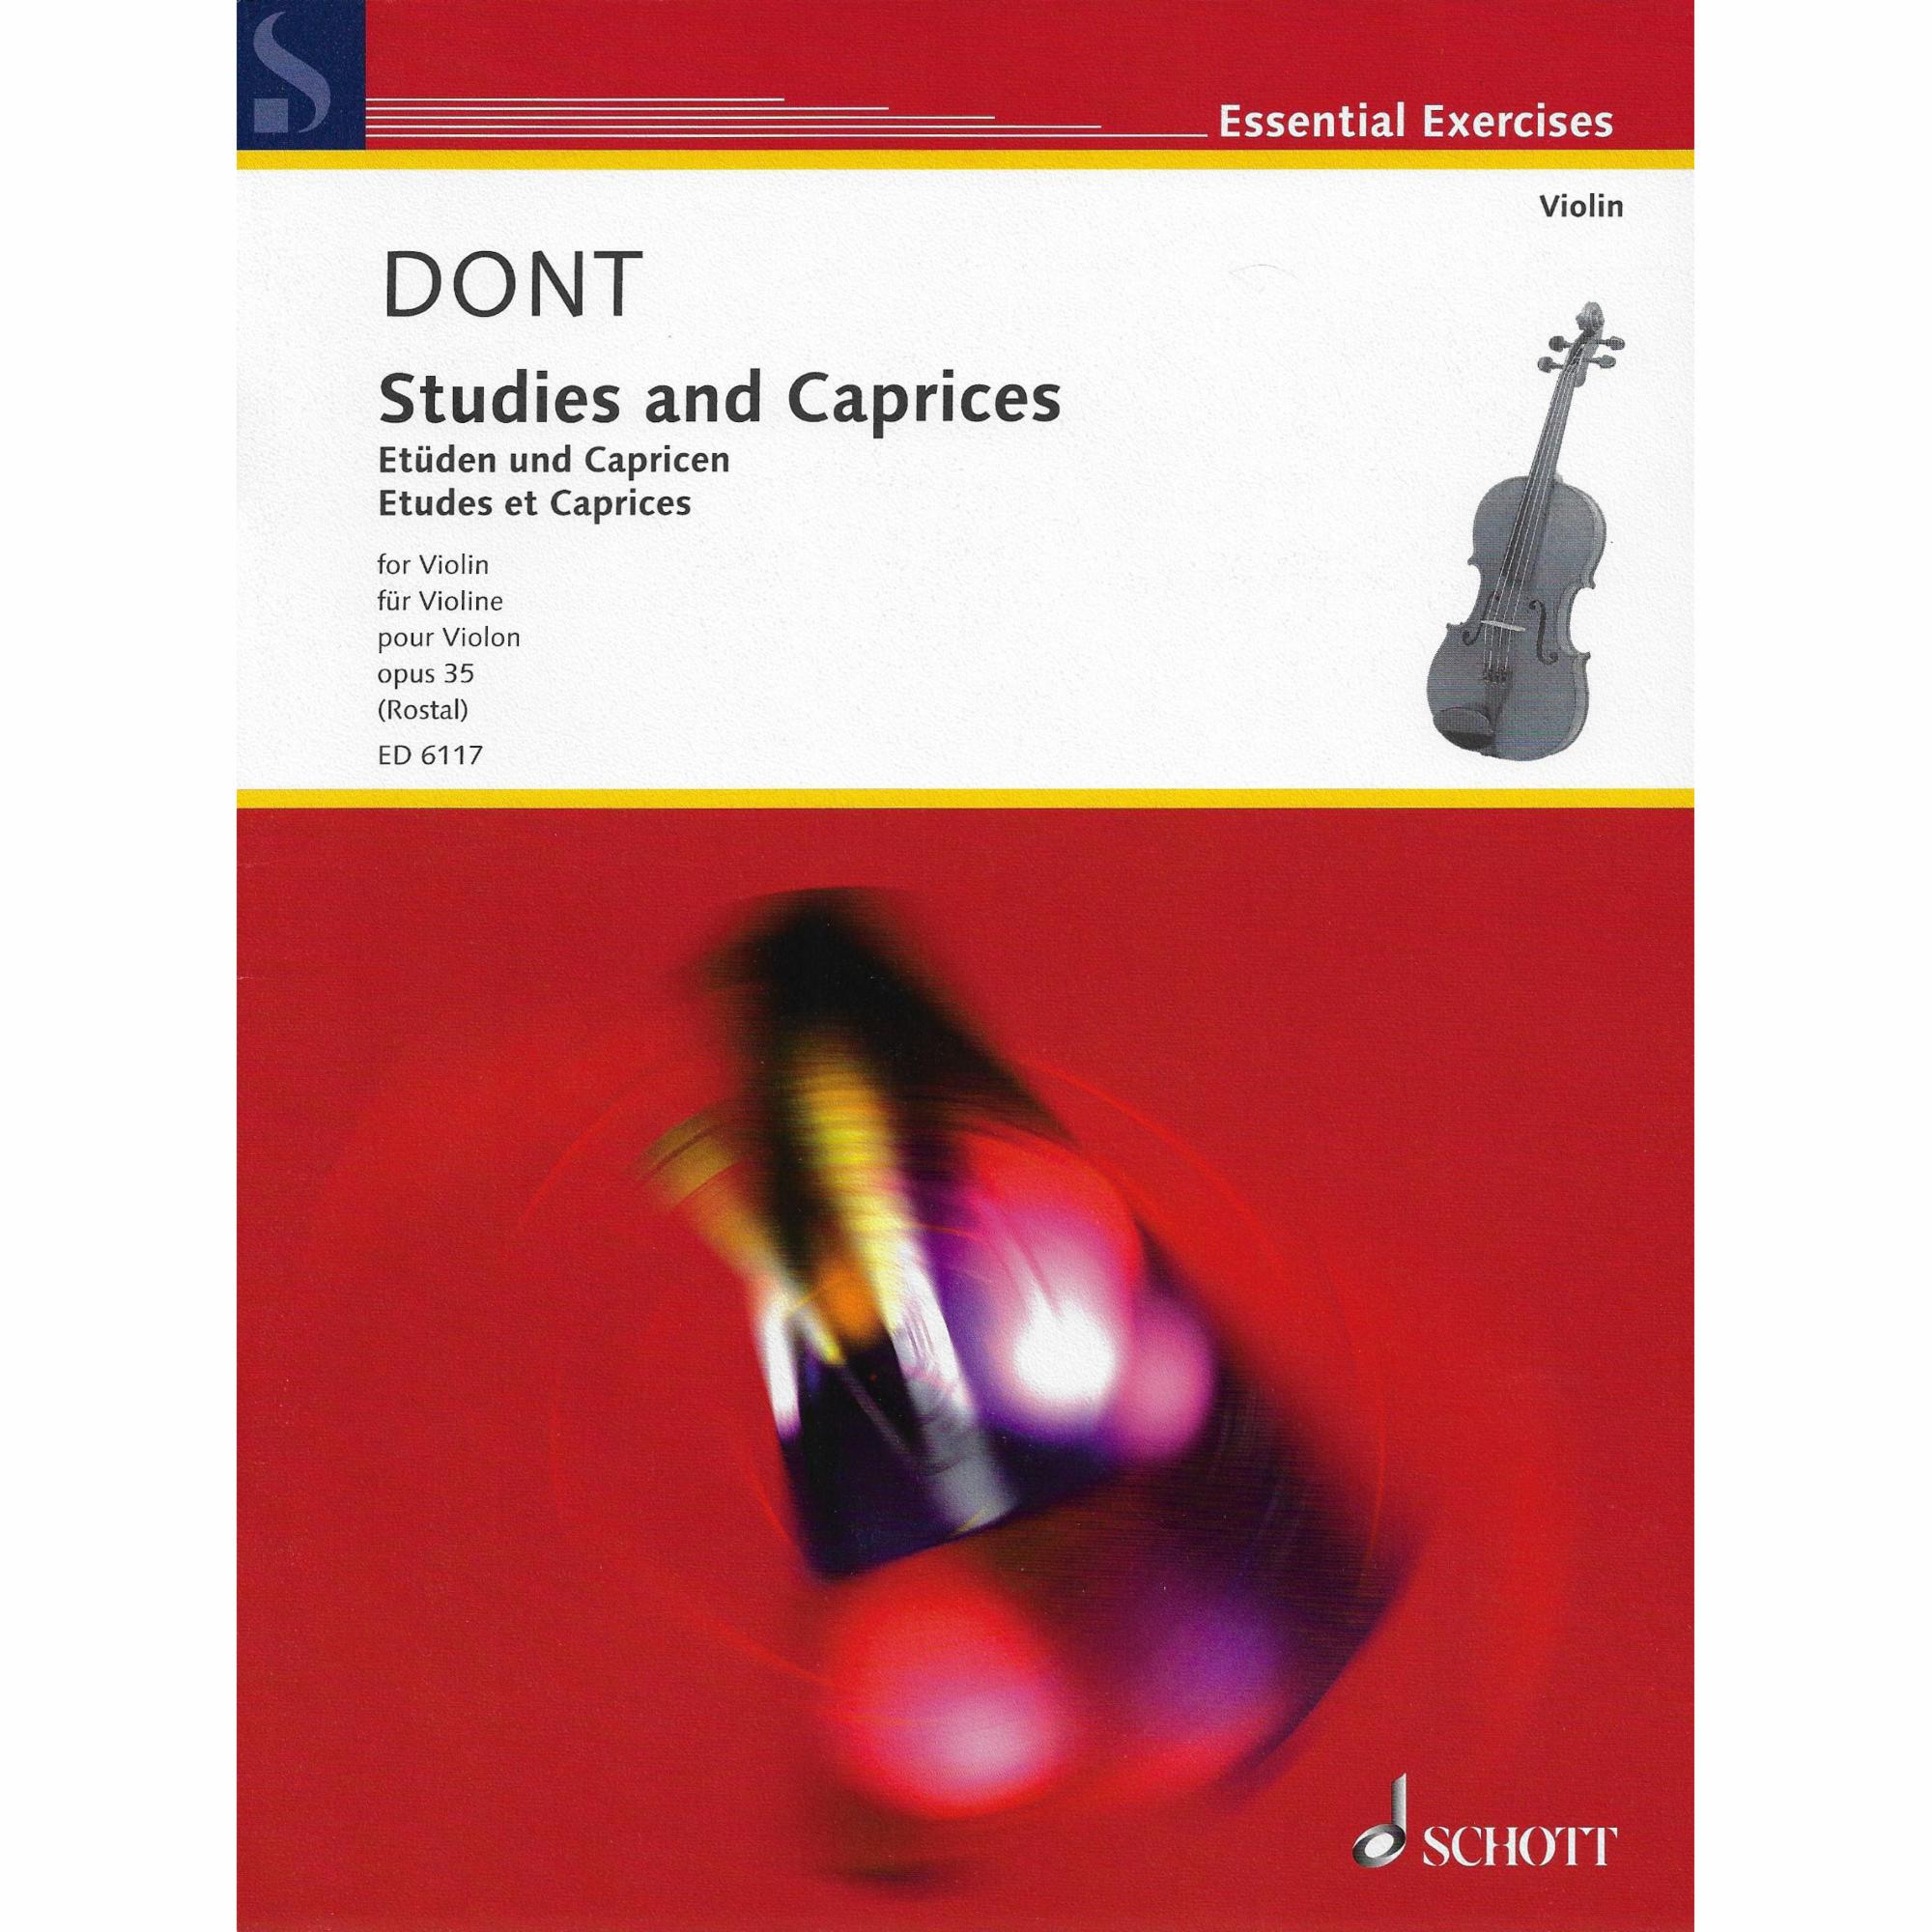 Dont -- Studies and Caprices, Op. 35 for Violin